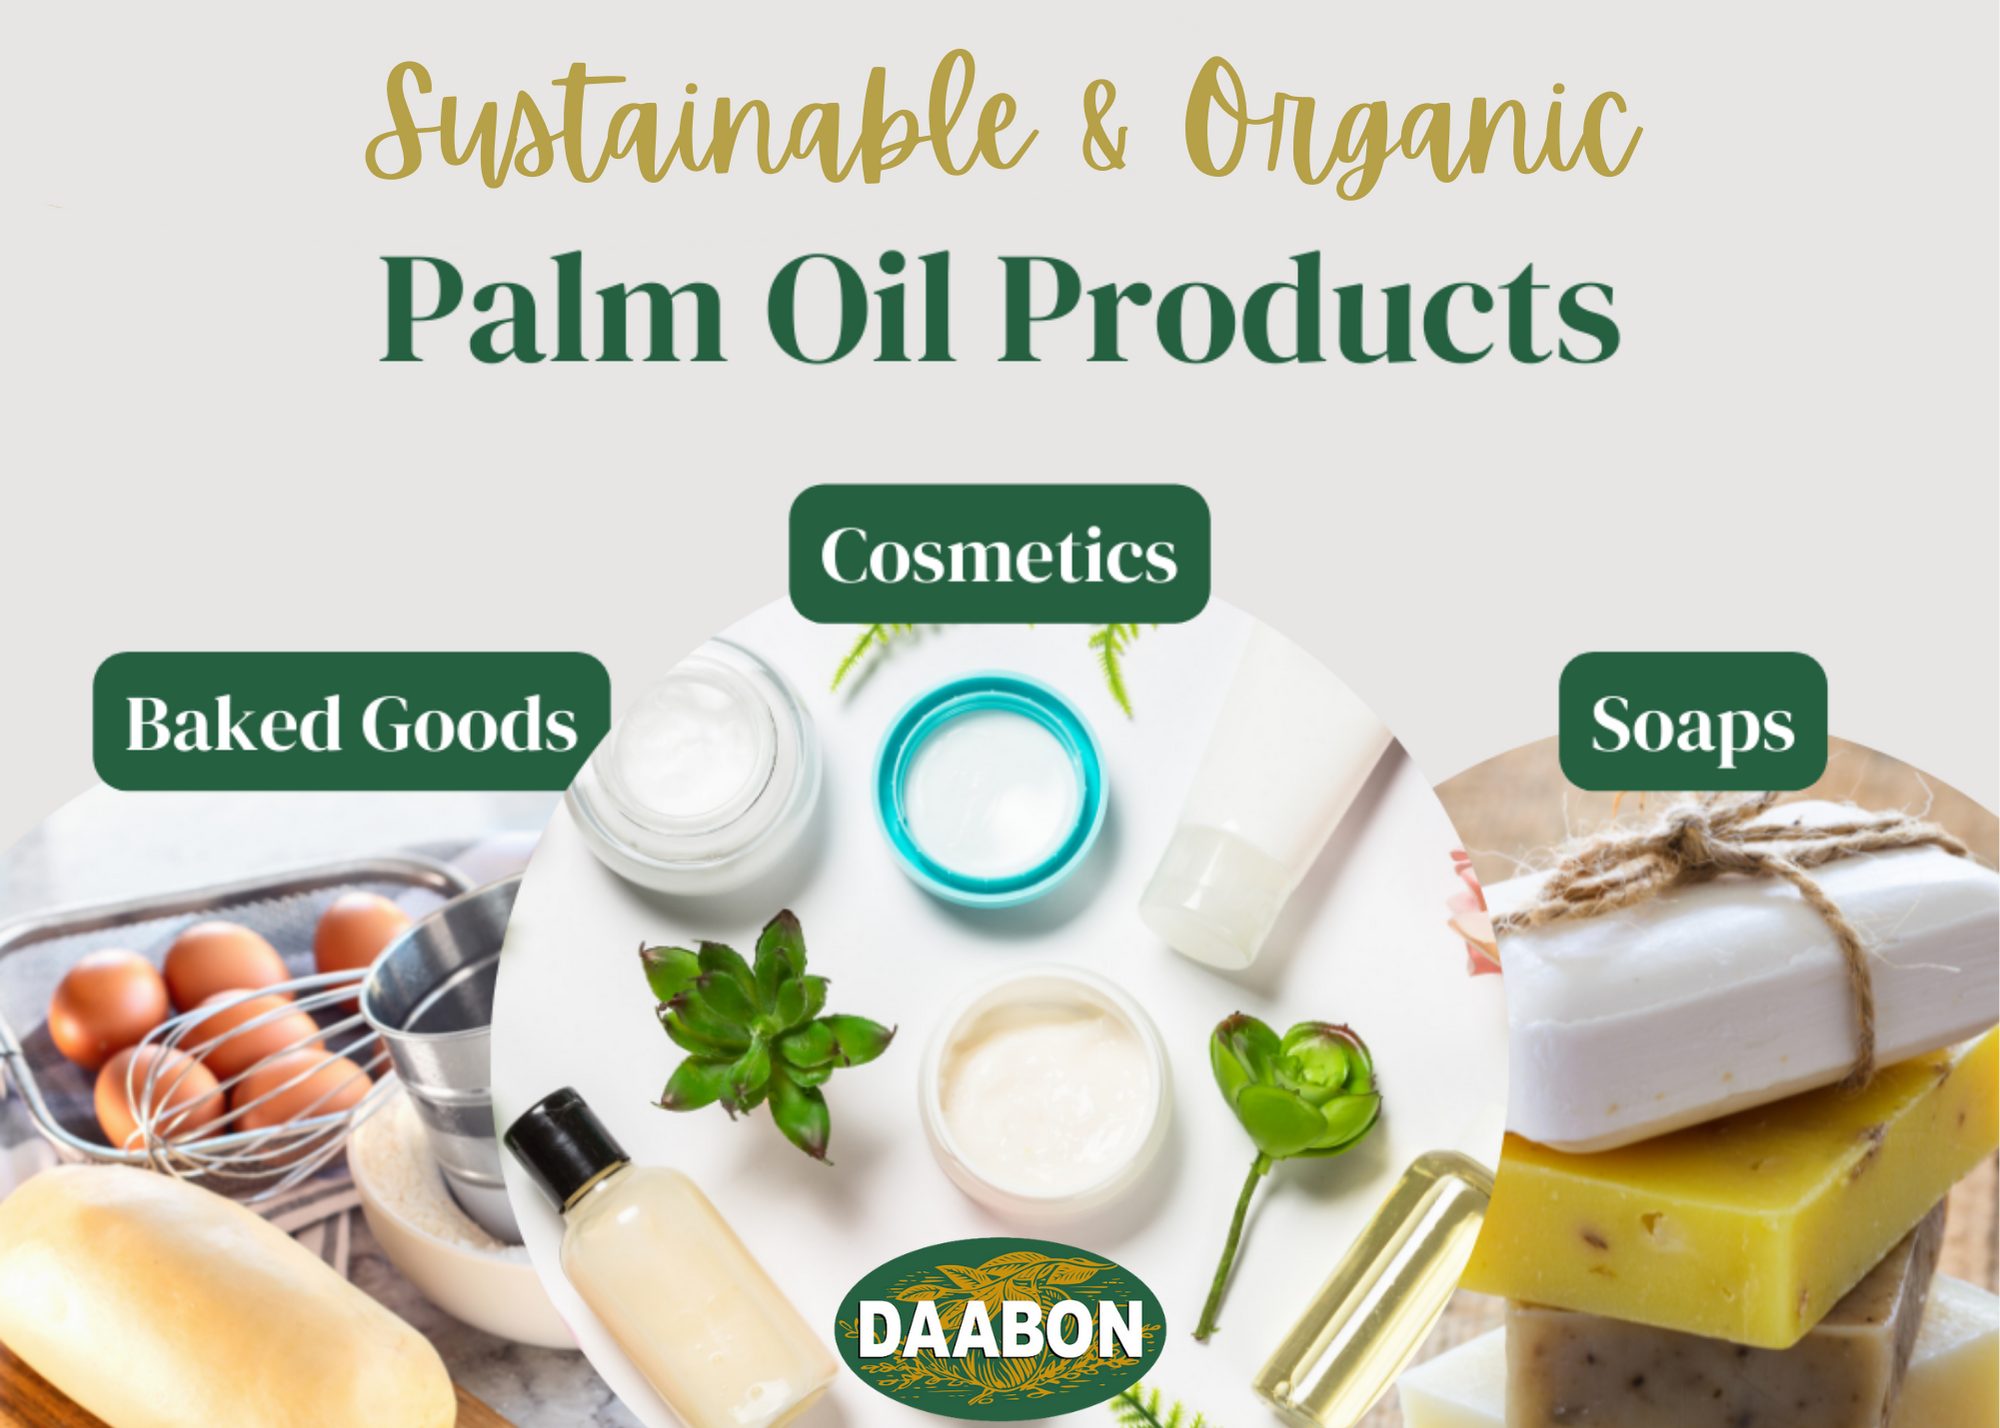 Sustainable Palm Oil: A groundbreaking ingredient in the food & beauty industry, when it’s done for the greater good